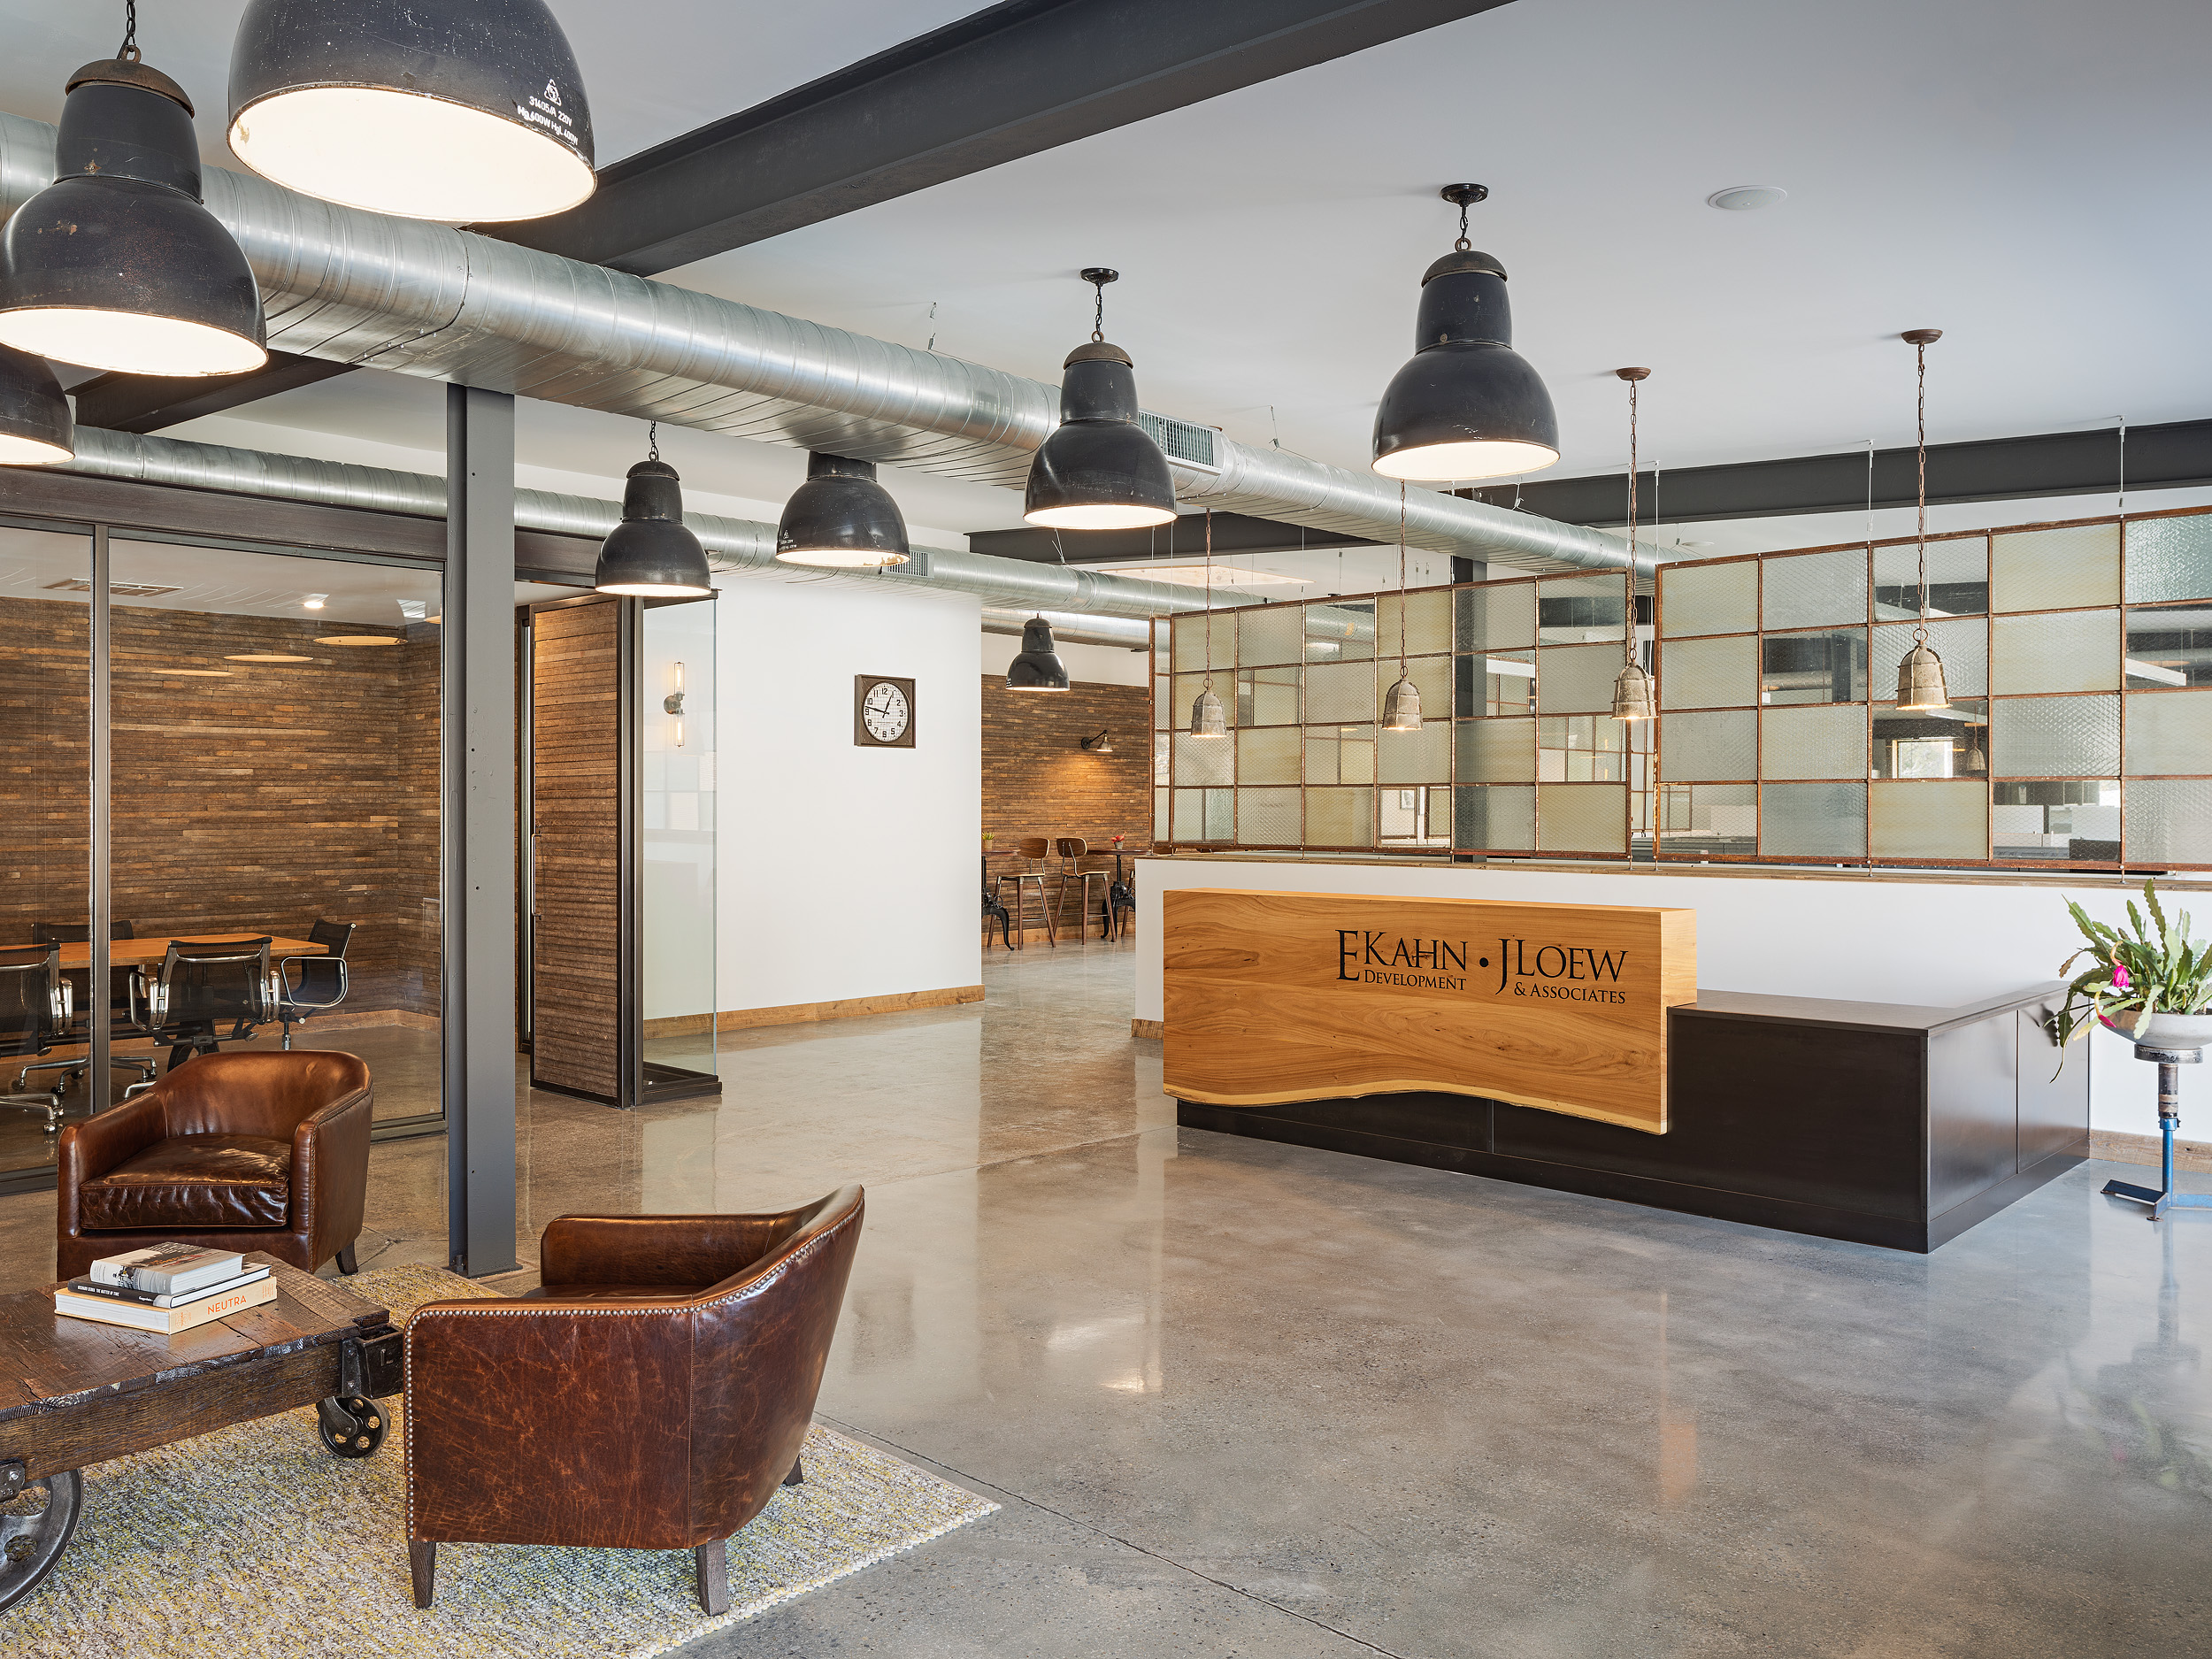   EKD/JLA OFFICES . Malvern, PA  &nbsp;    SRJ was hired by Eli Kahn Development and J.Loew and Associates to design combined offices for their company in a former 10,000sf warehouse space. &nbsp;They desired an open office that promoted more social 